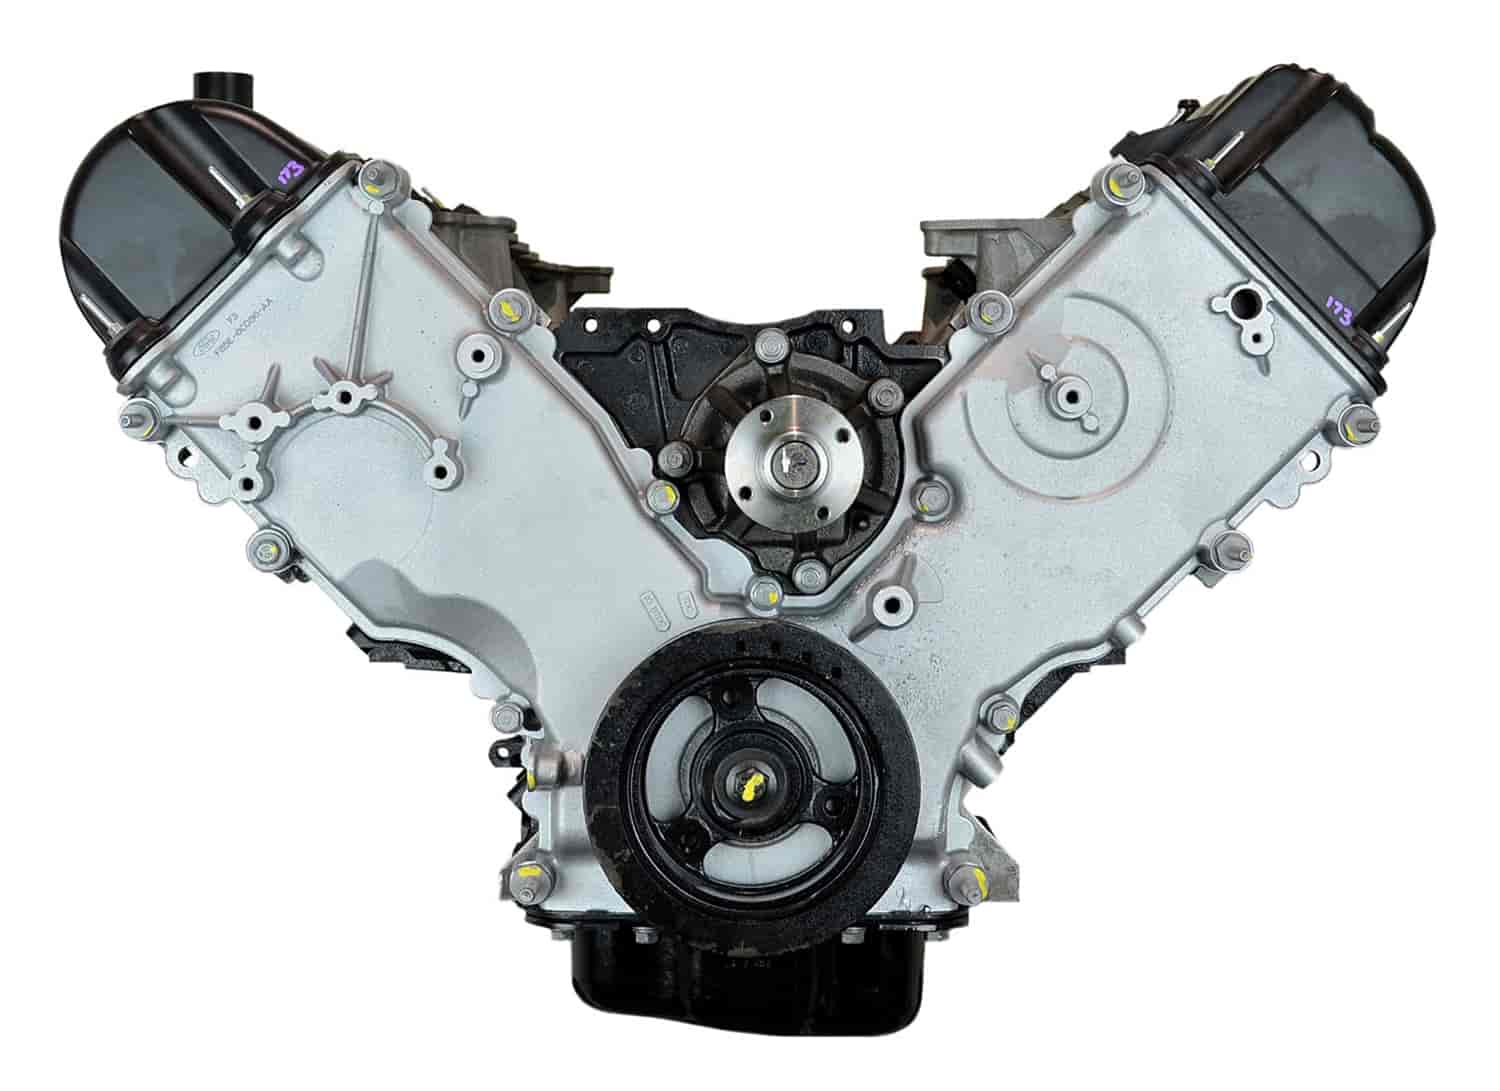 Remanufactured Crate Engine for 1997-1999 Ford E-Series Van